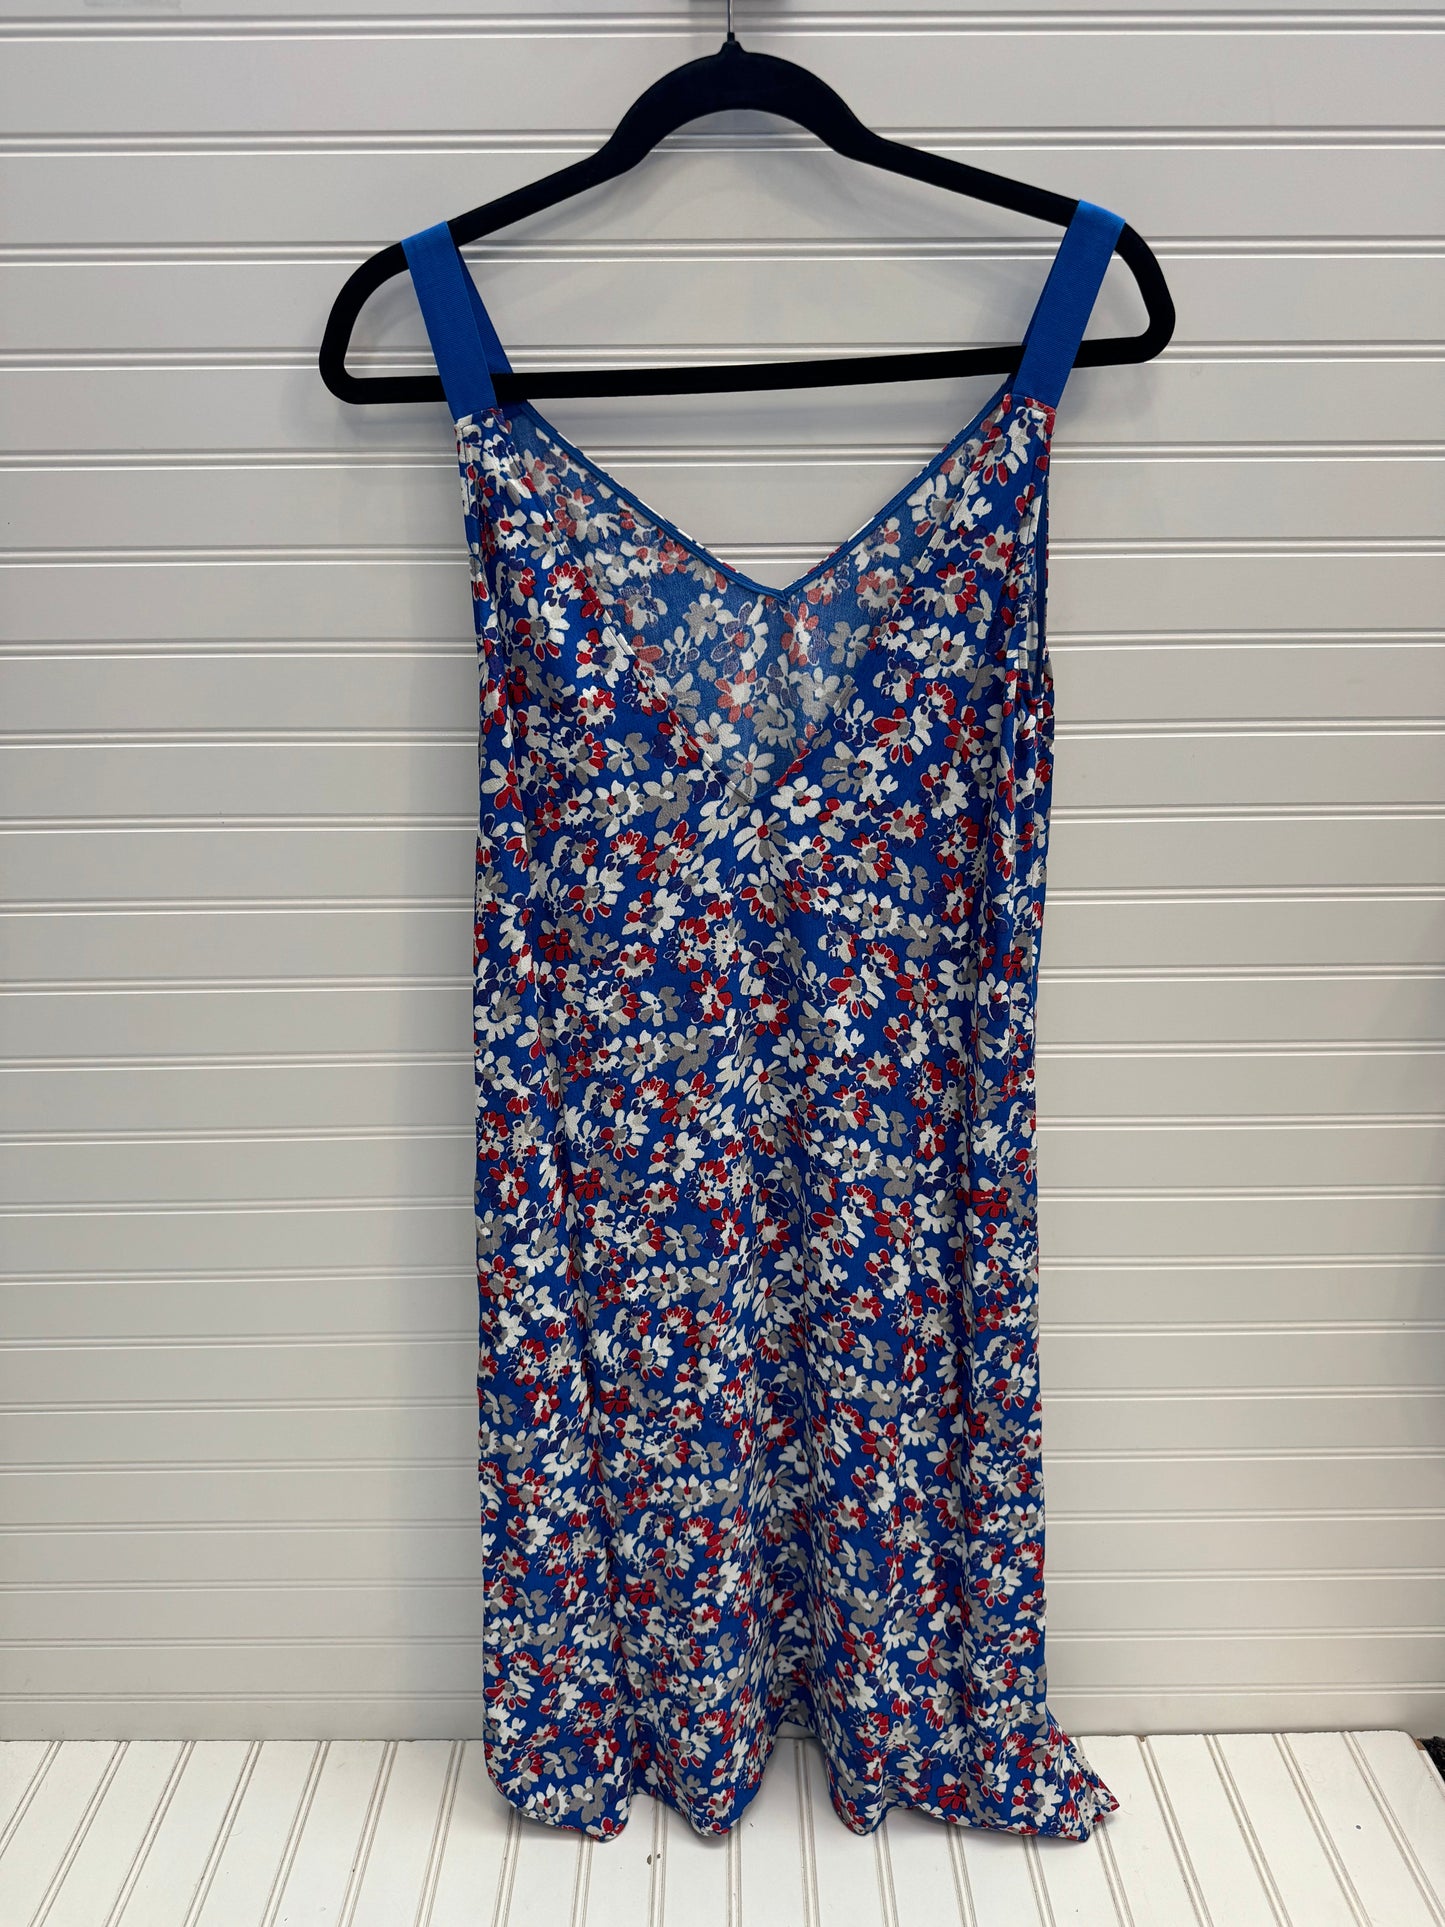 Blue & Red & White Dress Casual Short Rag And Bone, Size Xs